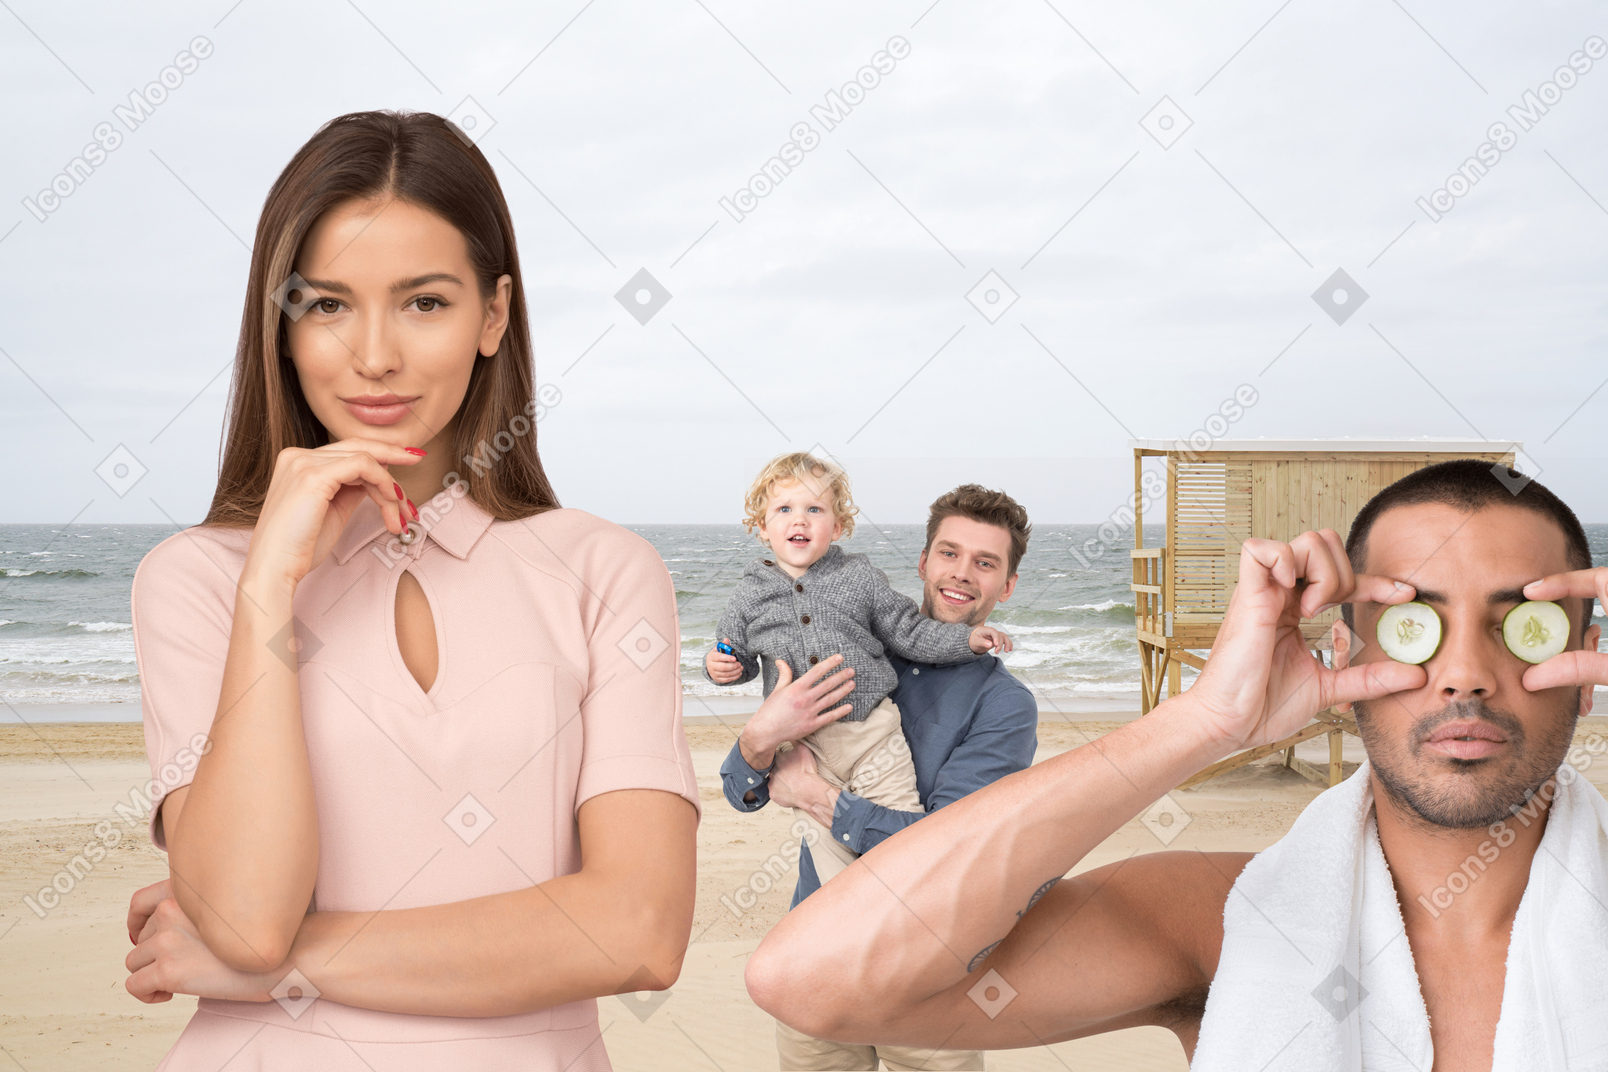 Man holding cucumber slices next to woman and another man holding little boy in his hands